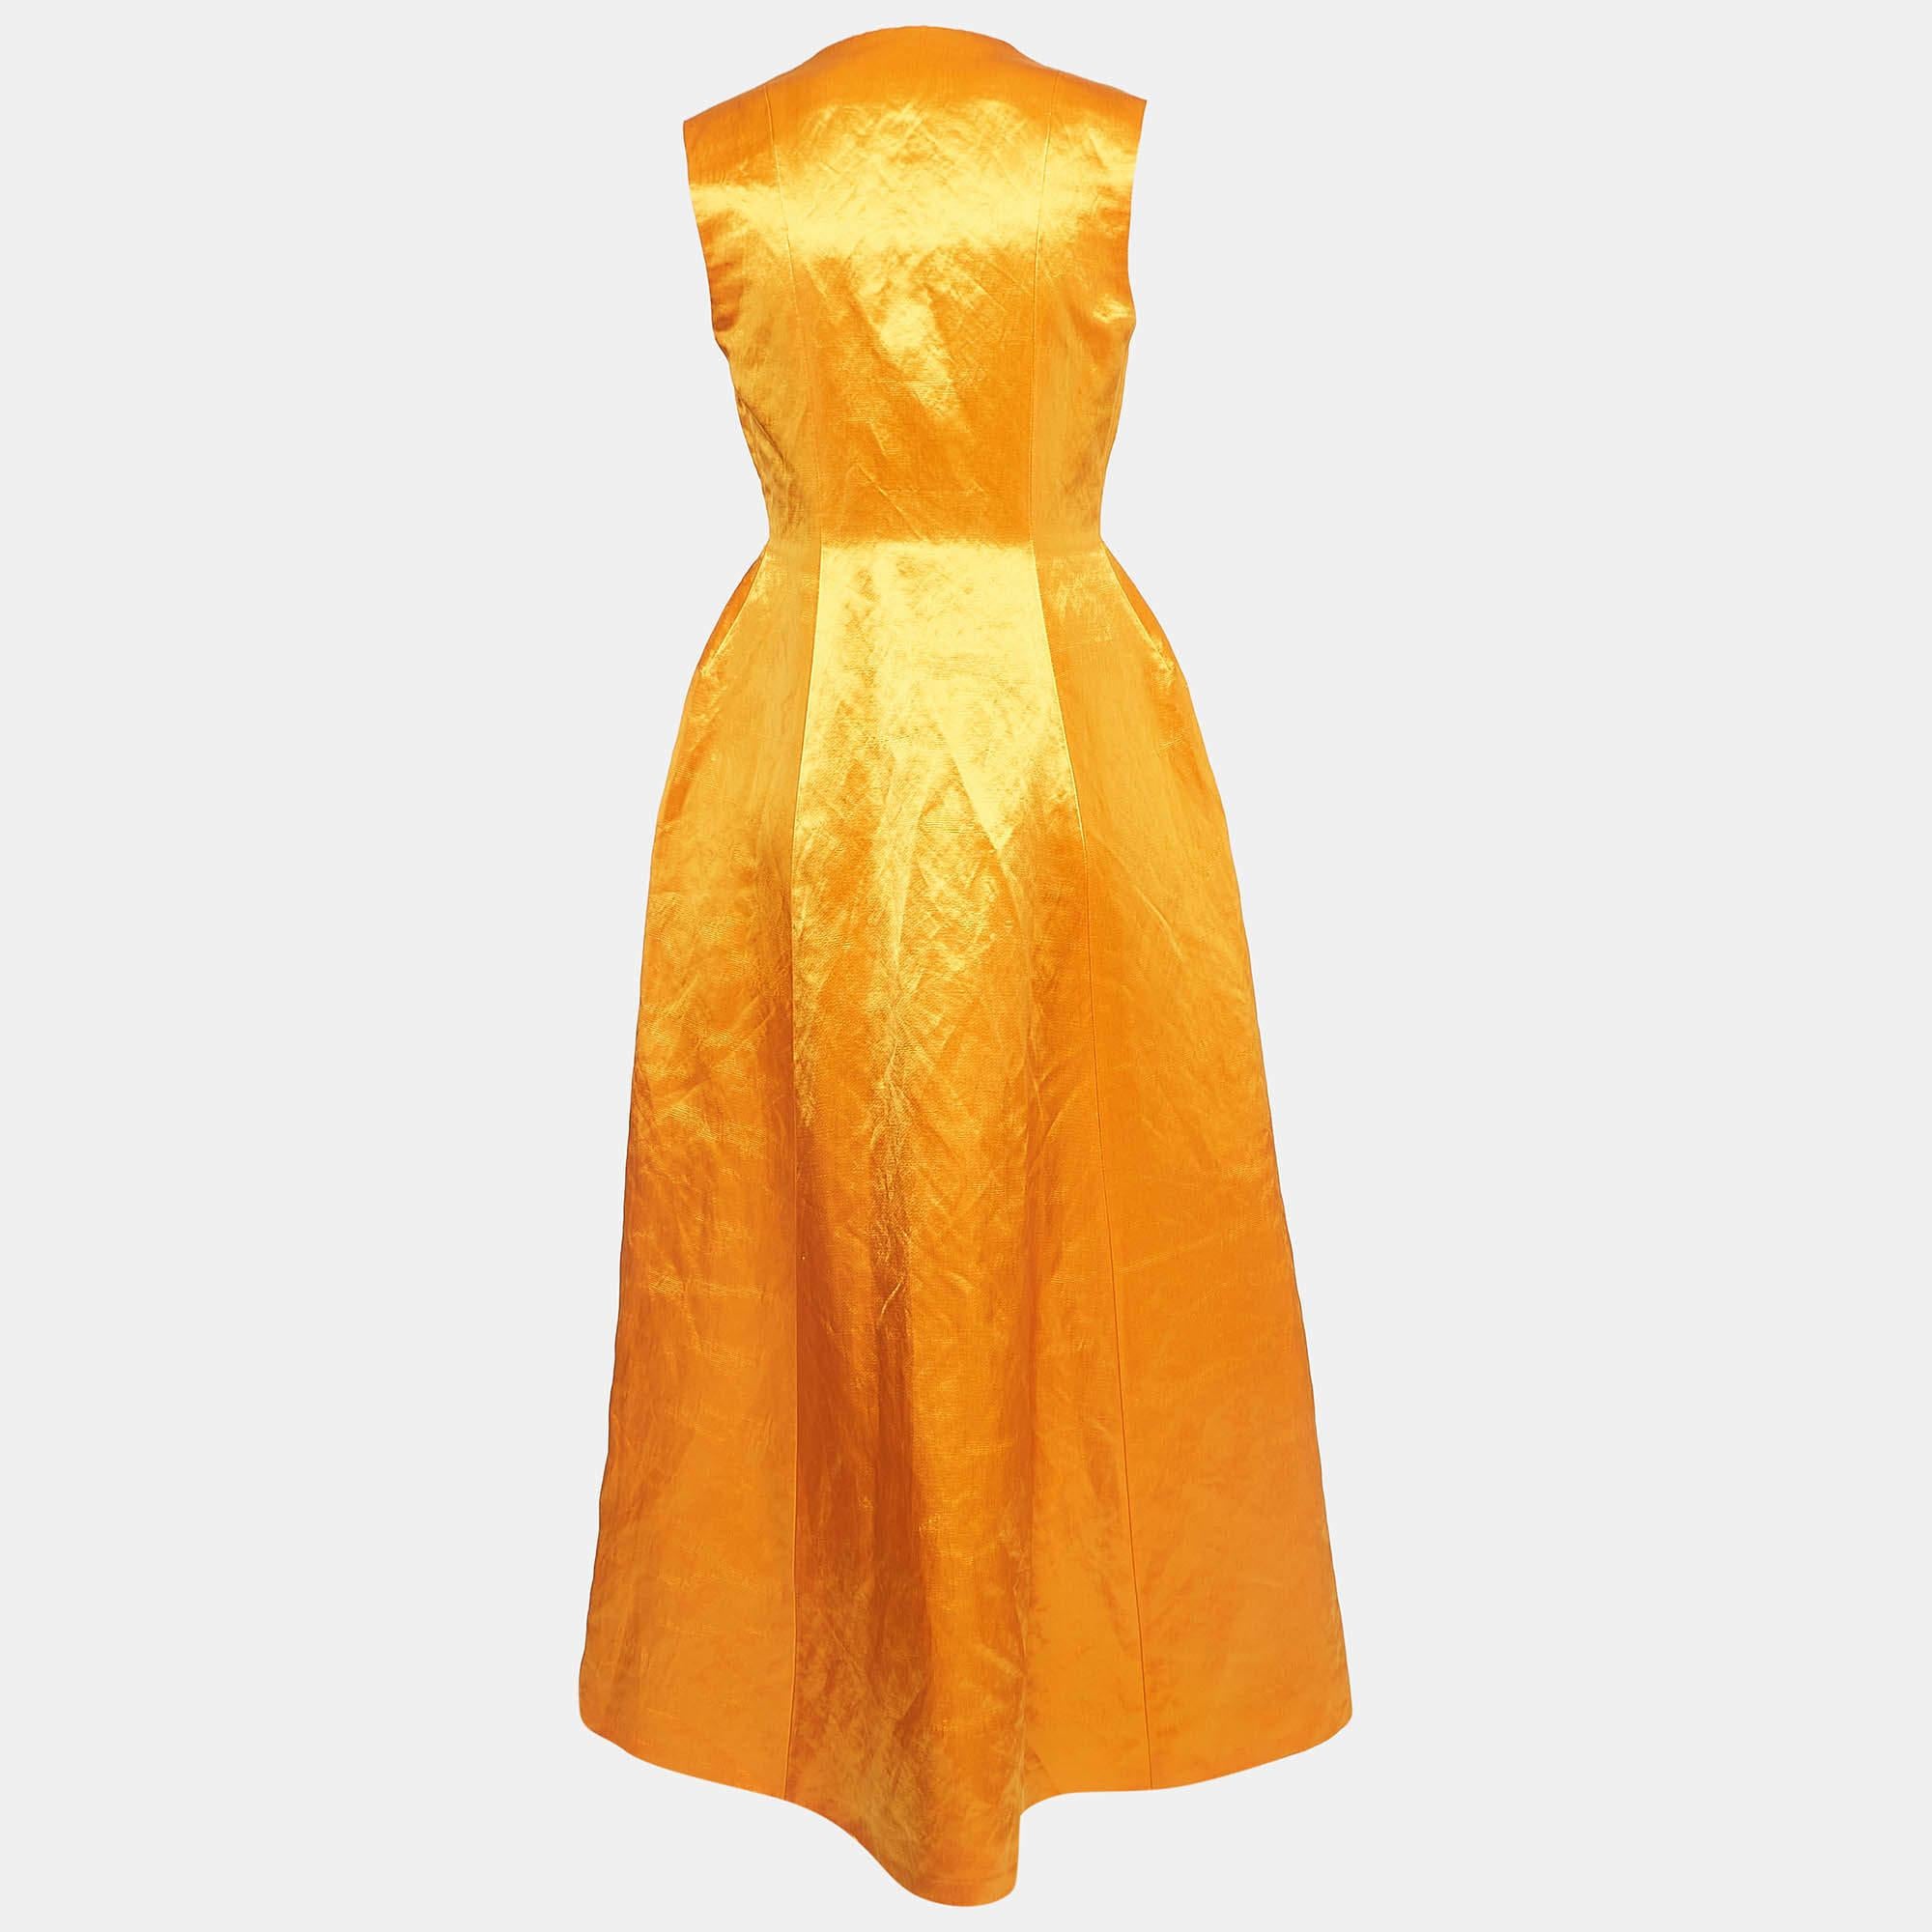 A gorgeous orange hue and elegant cuts elevate the charm of this Dior maxi dress. Tailored using satin, the creation has a cinched waist and hook closure for the desired fit. Complement this dress with an evening clutch and slingback heels for the